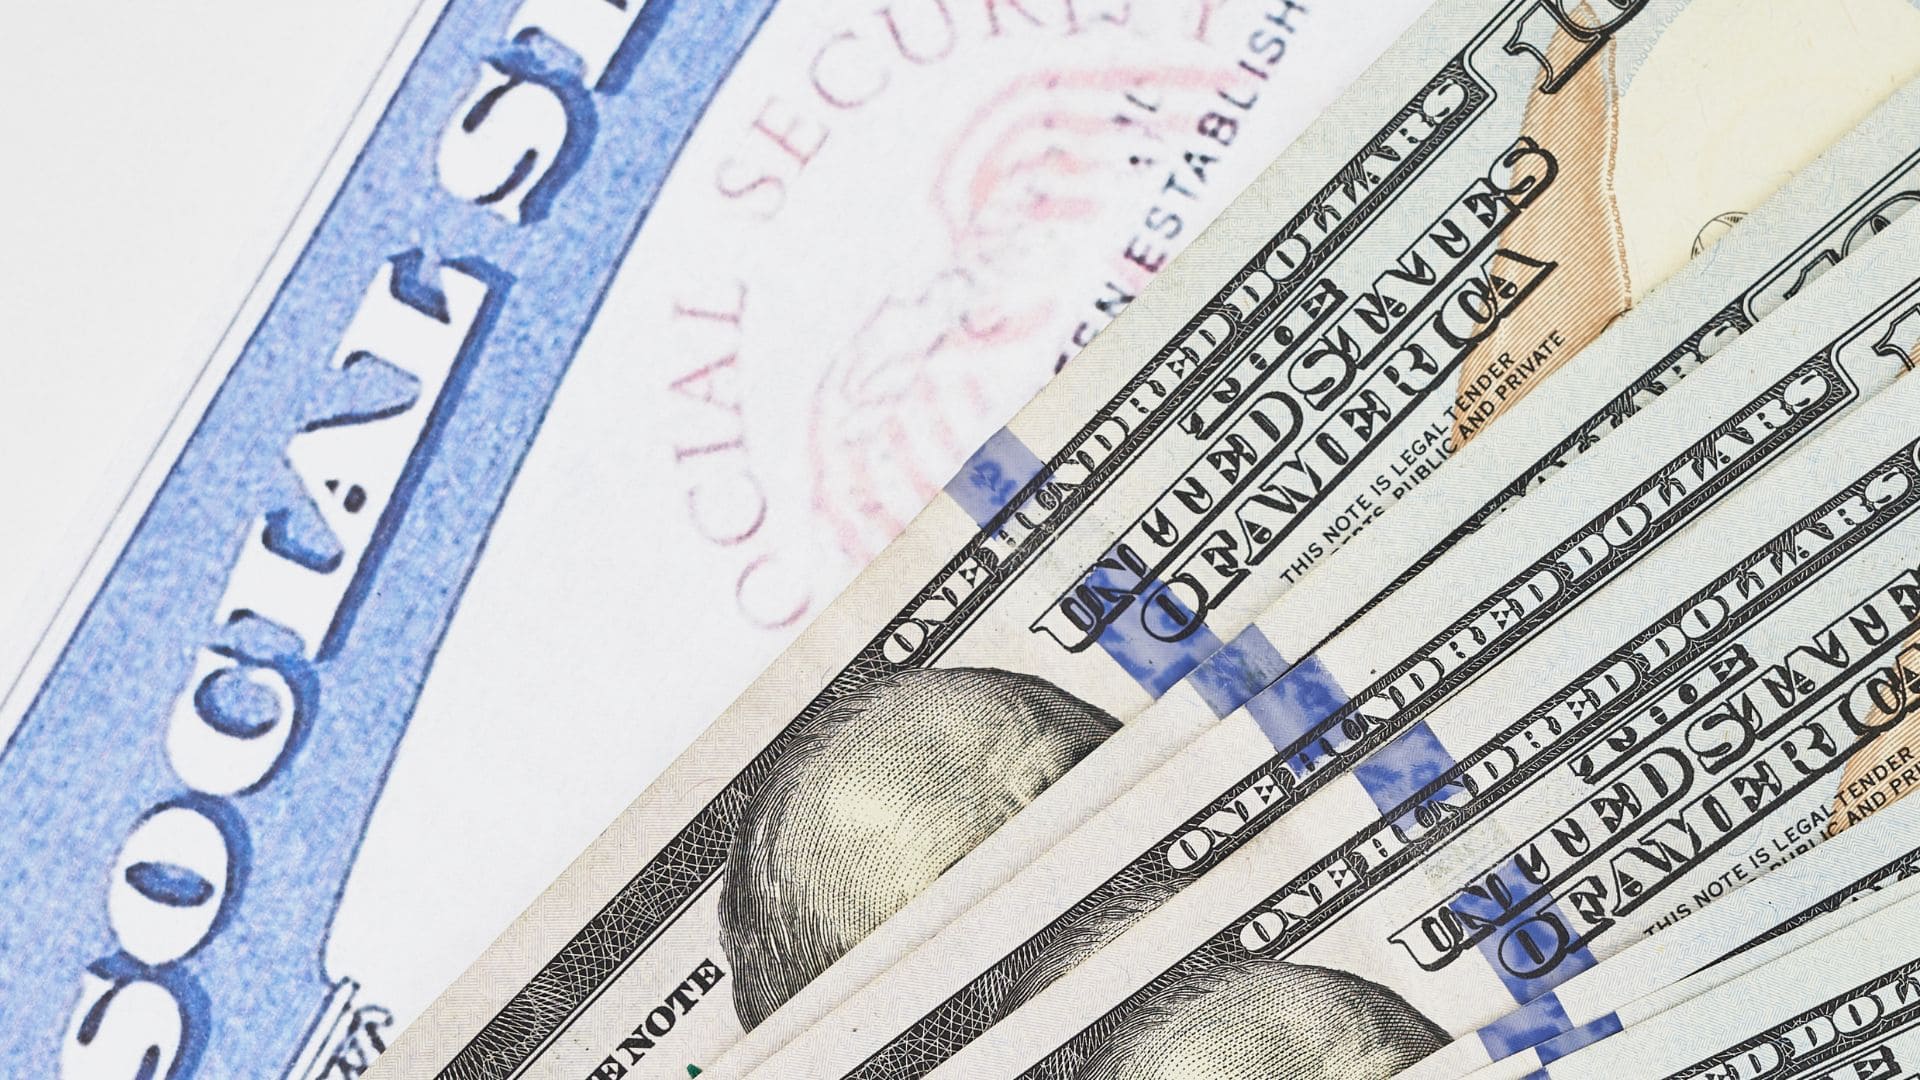 Social Security is sending new checks to Disabiliy beneficiaries